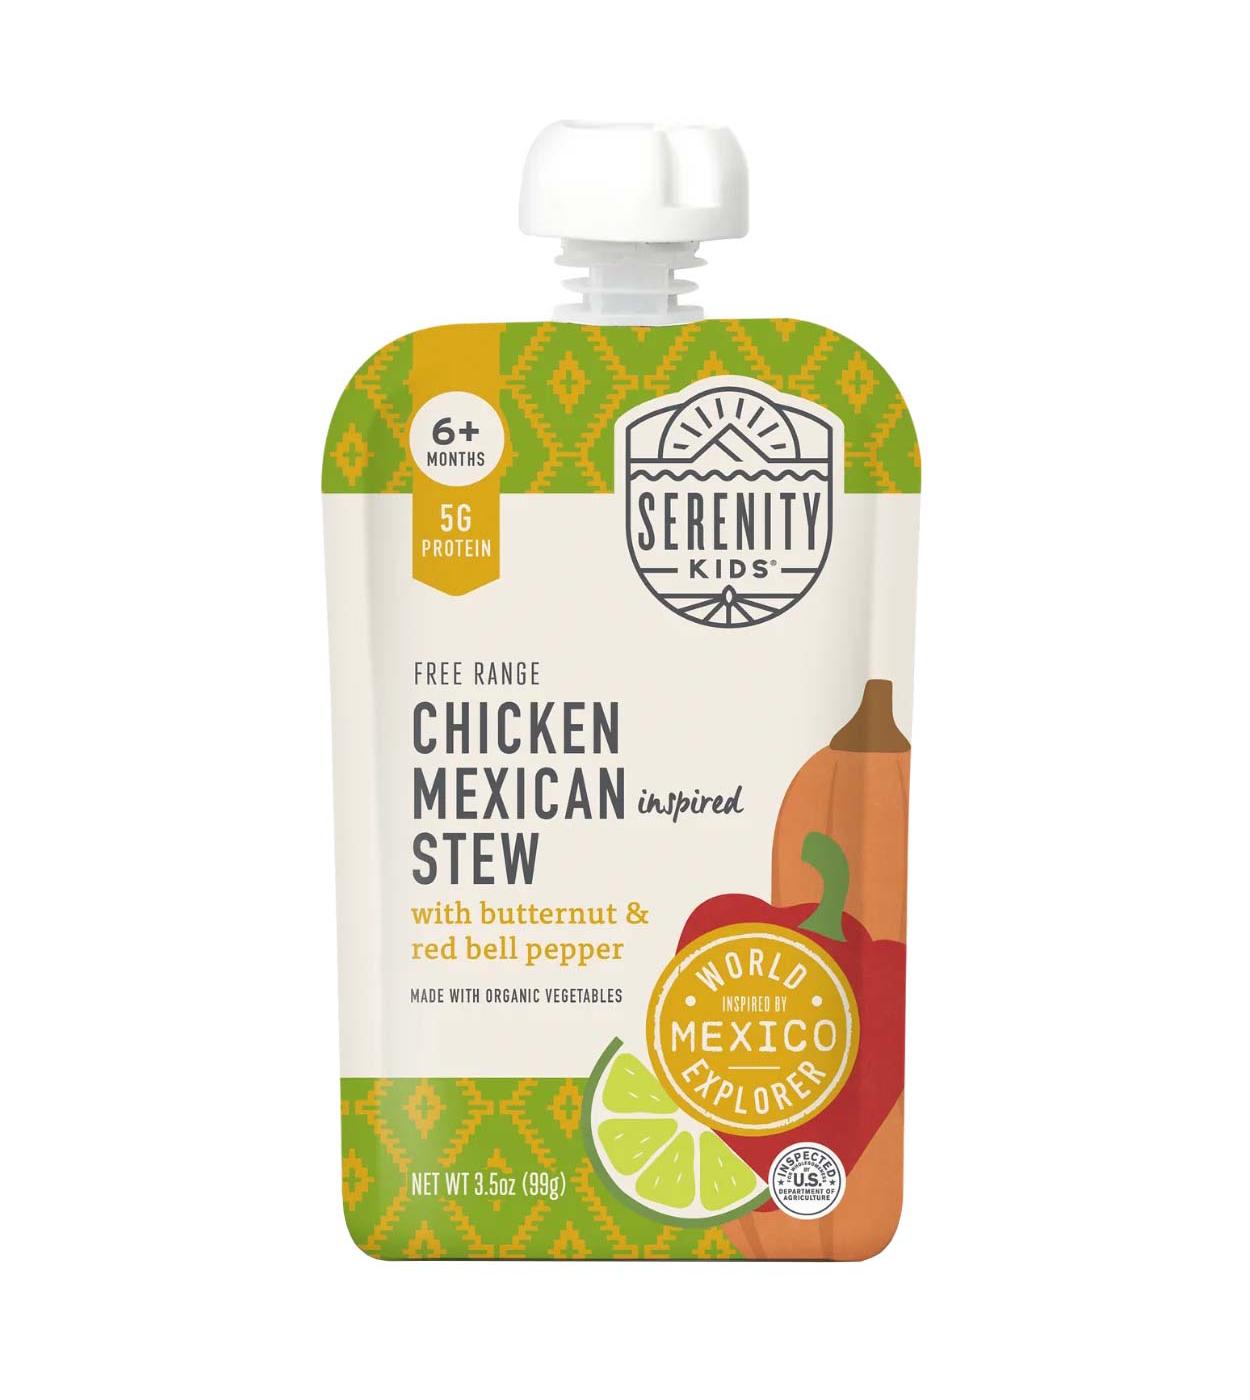 Serenity Kids Baby Food Pouch - Free Range Chicken Mexican Stew; image 1 of 2